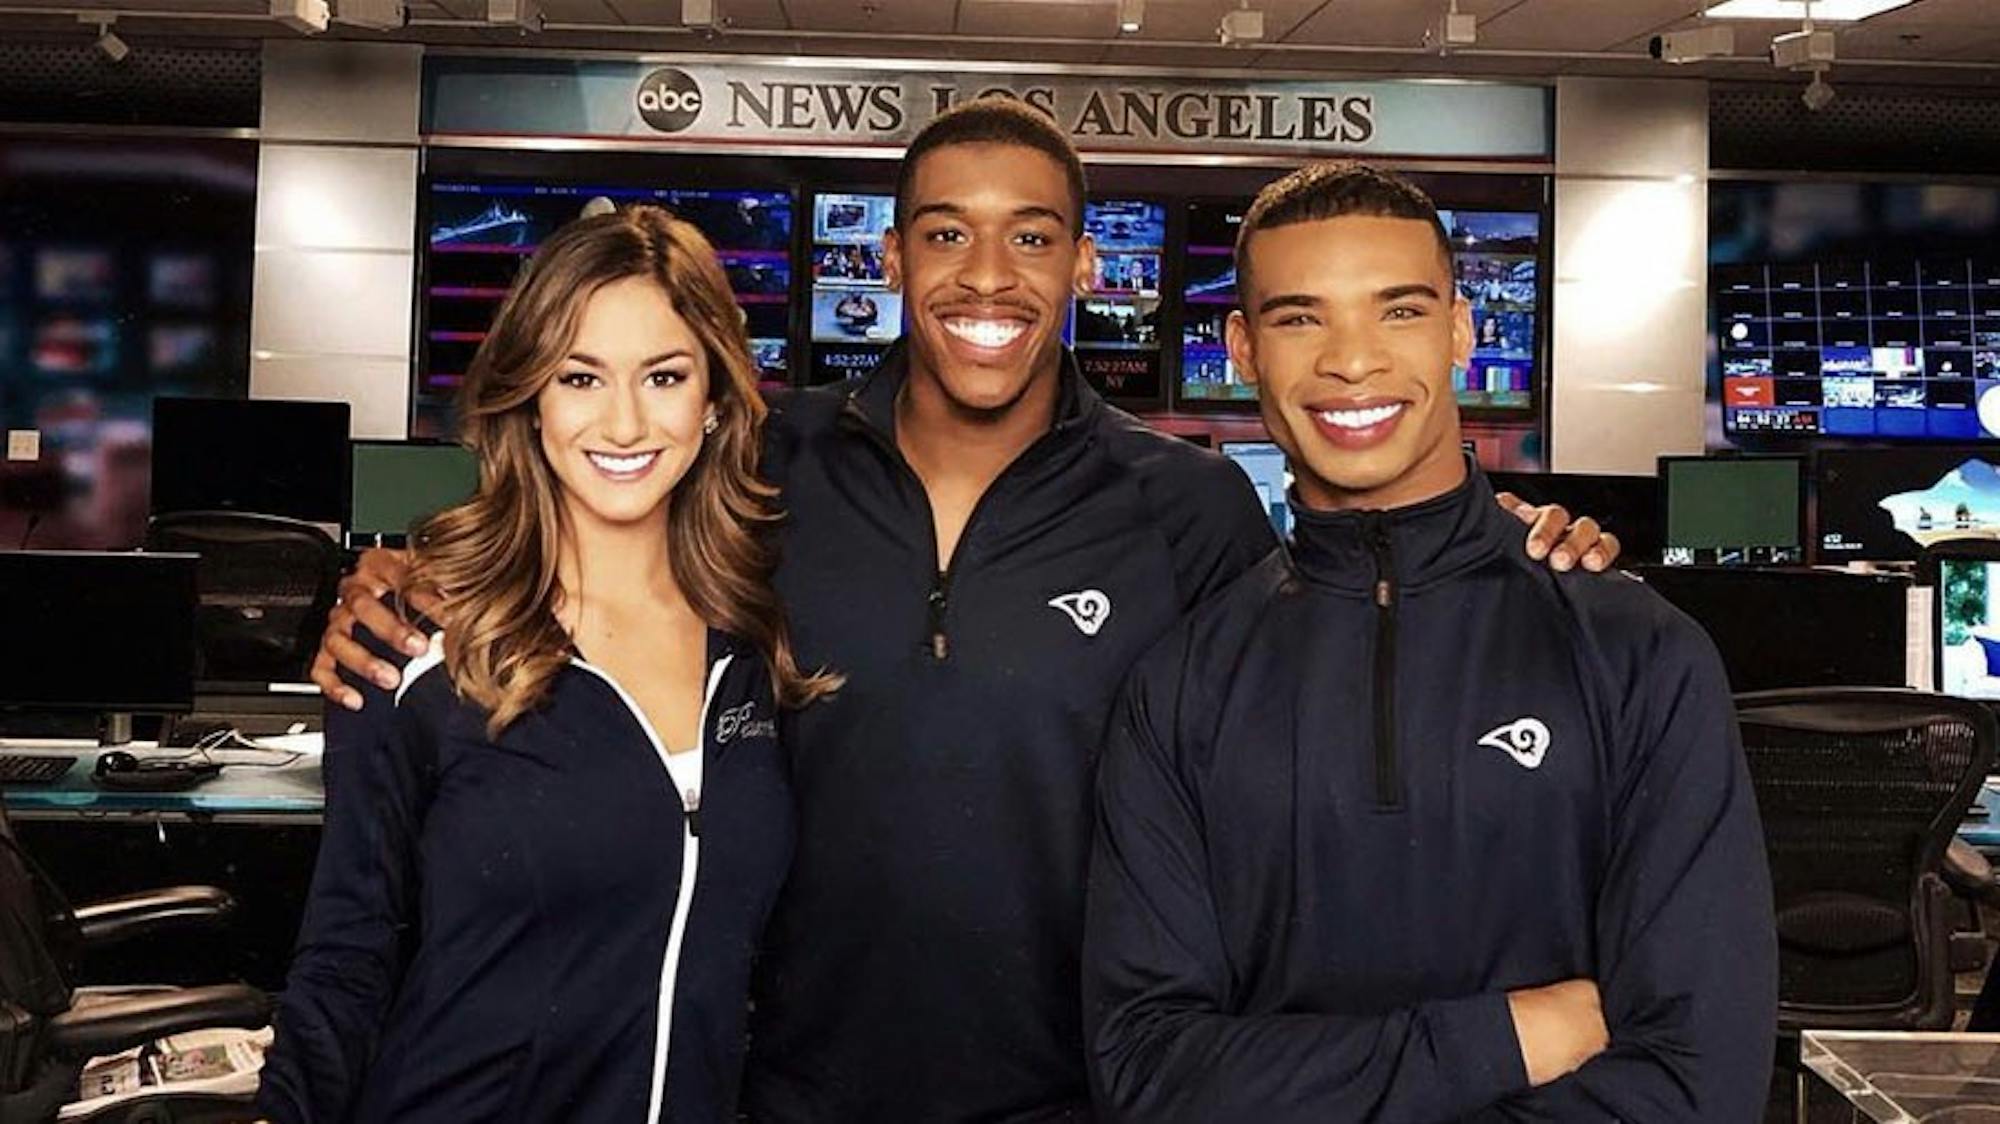 On April 2018, the Los Angeles Rams added two men to their cheerleading squad, becoming the first National Football League team to have male dancers on the field.